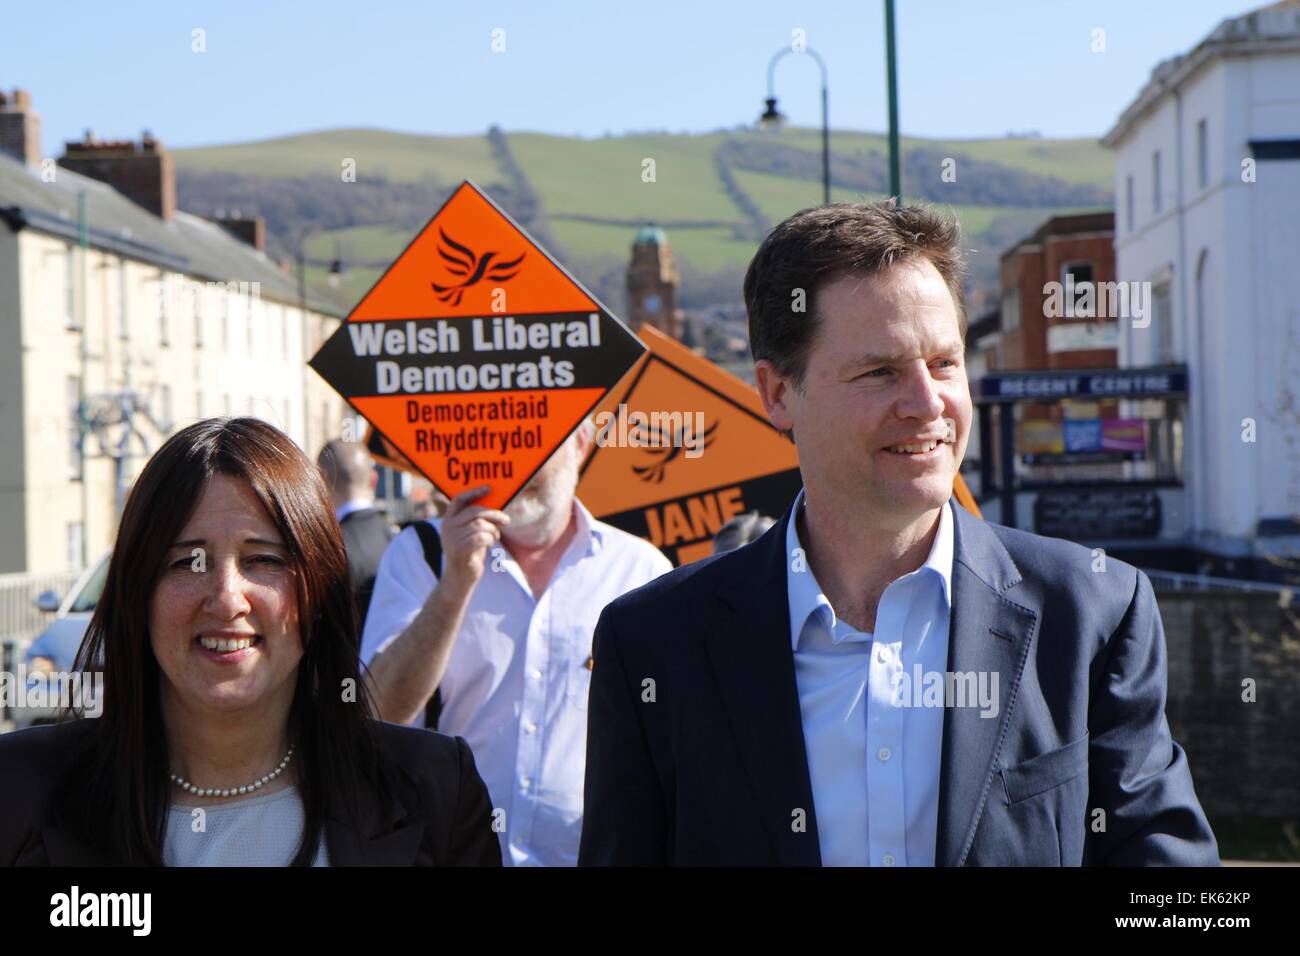 Newtown, UK. 7th April, 2015. Deputy Prime Minister & Leader of the Lib Dems, Nick Clegg, visits Newtown in the Montgomeryshire Constituency as a part of his campaign for votes in the forthcoming General Election, UK. Credit:  Jon Freeman/Alamy Live News Stock Photo